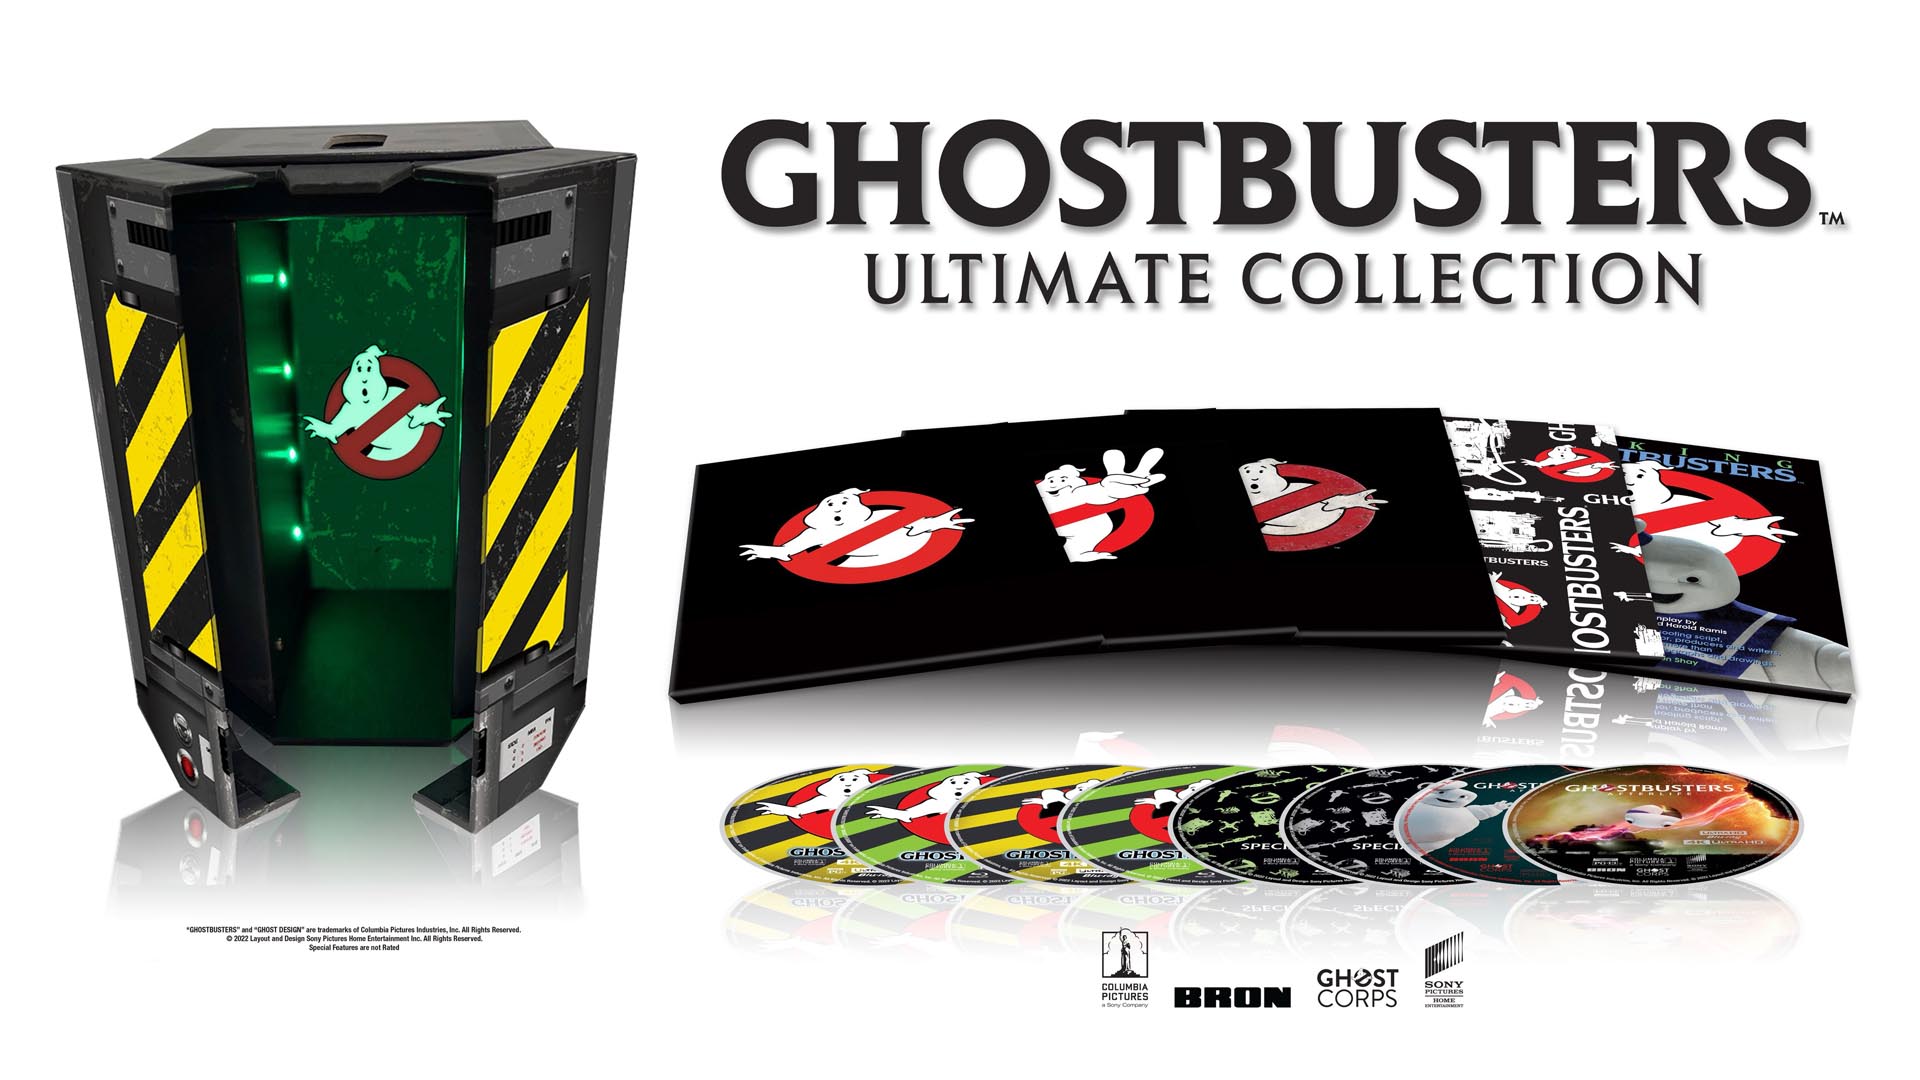 ghostbusters_afterlife_collection_banner.jpg